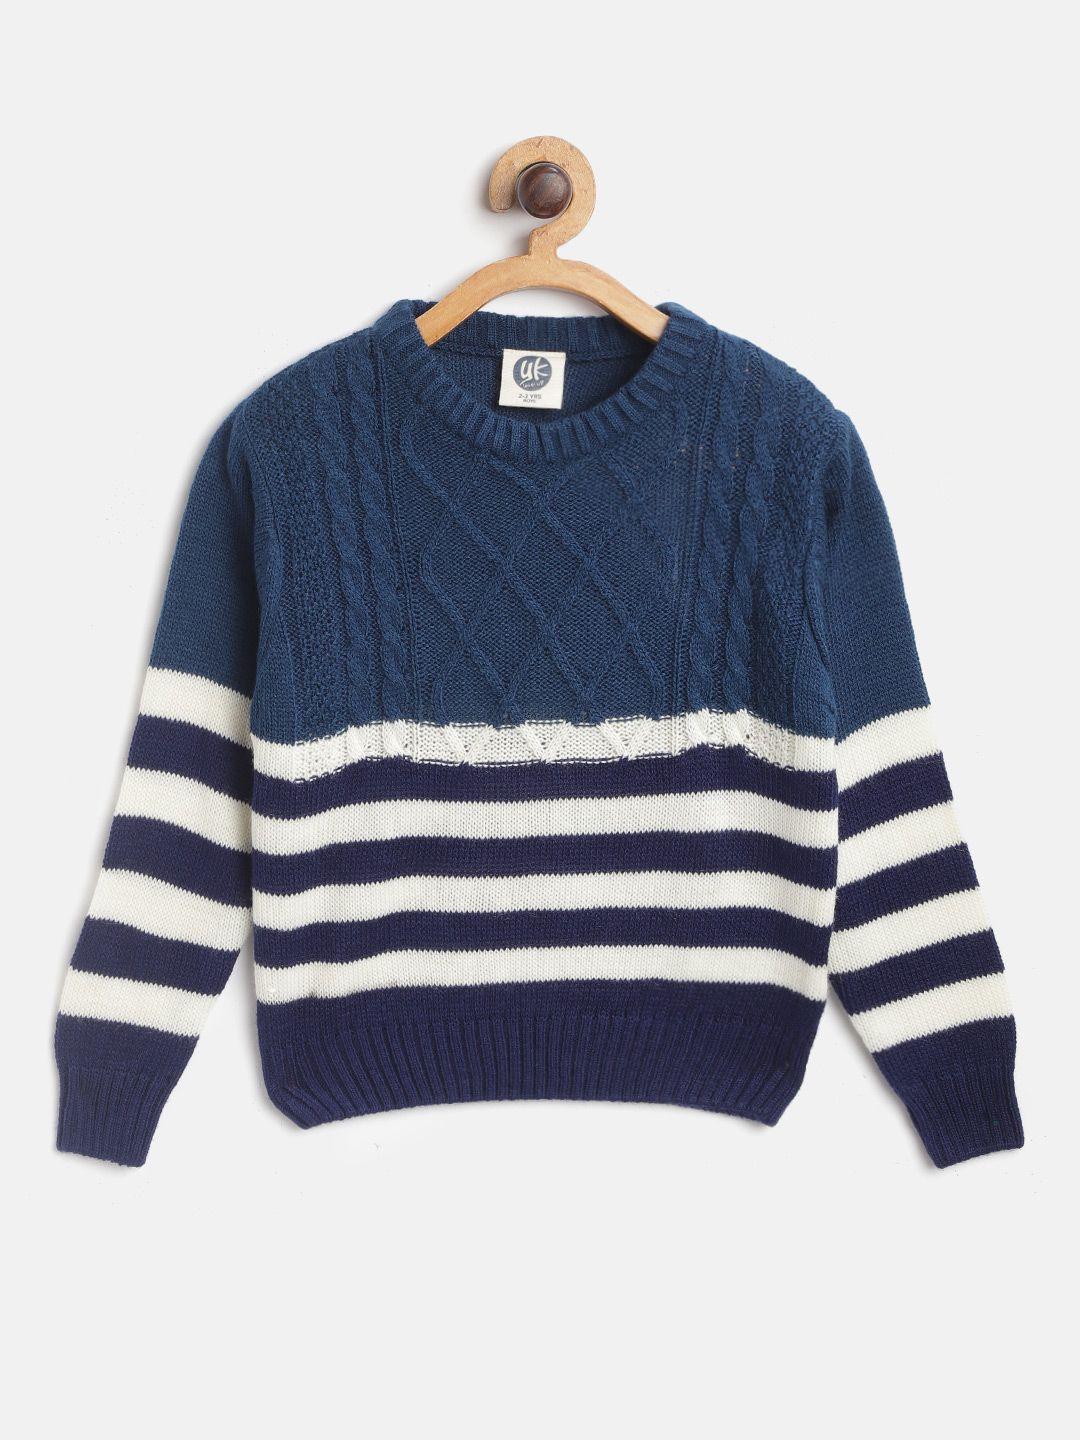 yk boys navy blue & off white striped pullover with cable knit detail